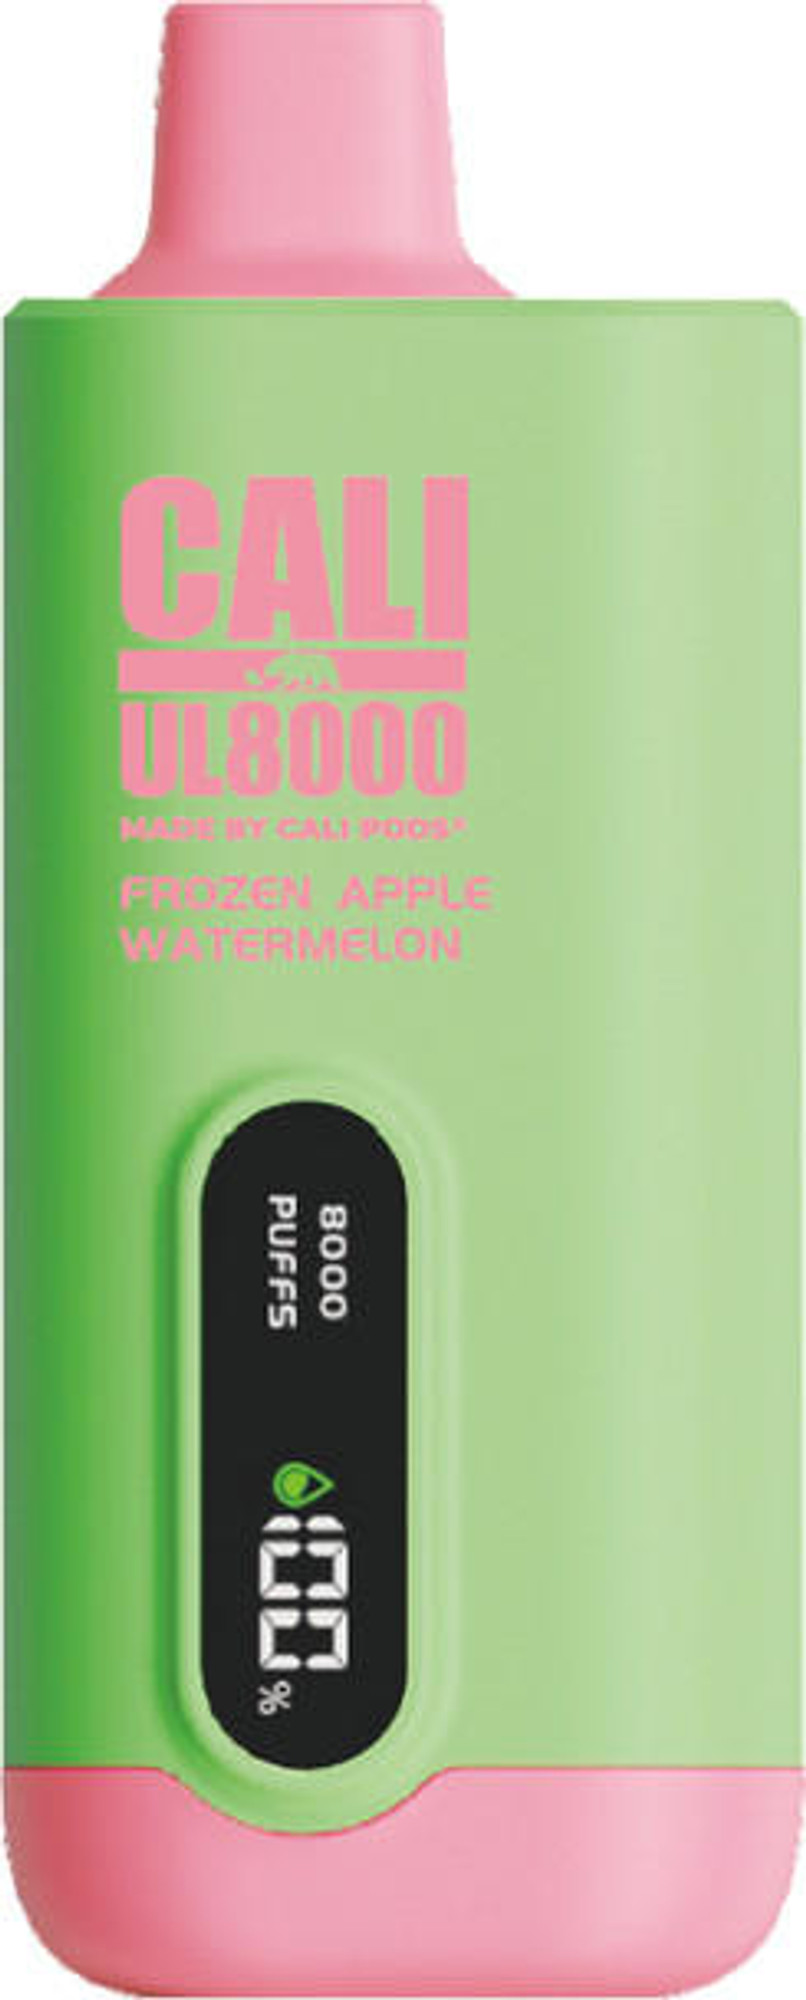 CALI UL8000 5% NIC RECHARGEABLE DISPOSABLE 18ML 8000 PUFFS - 6CT